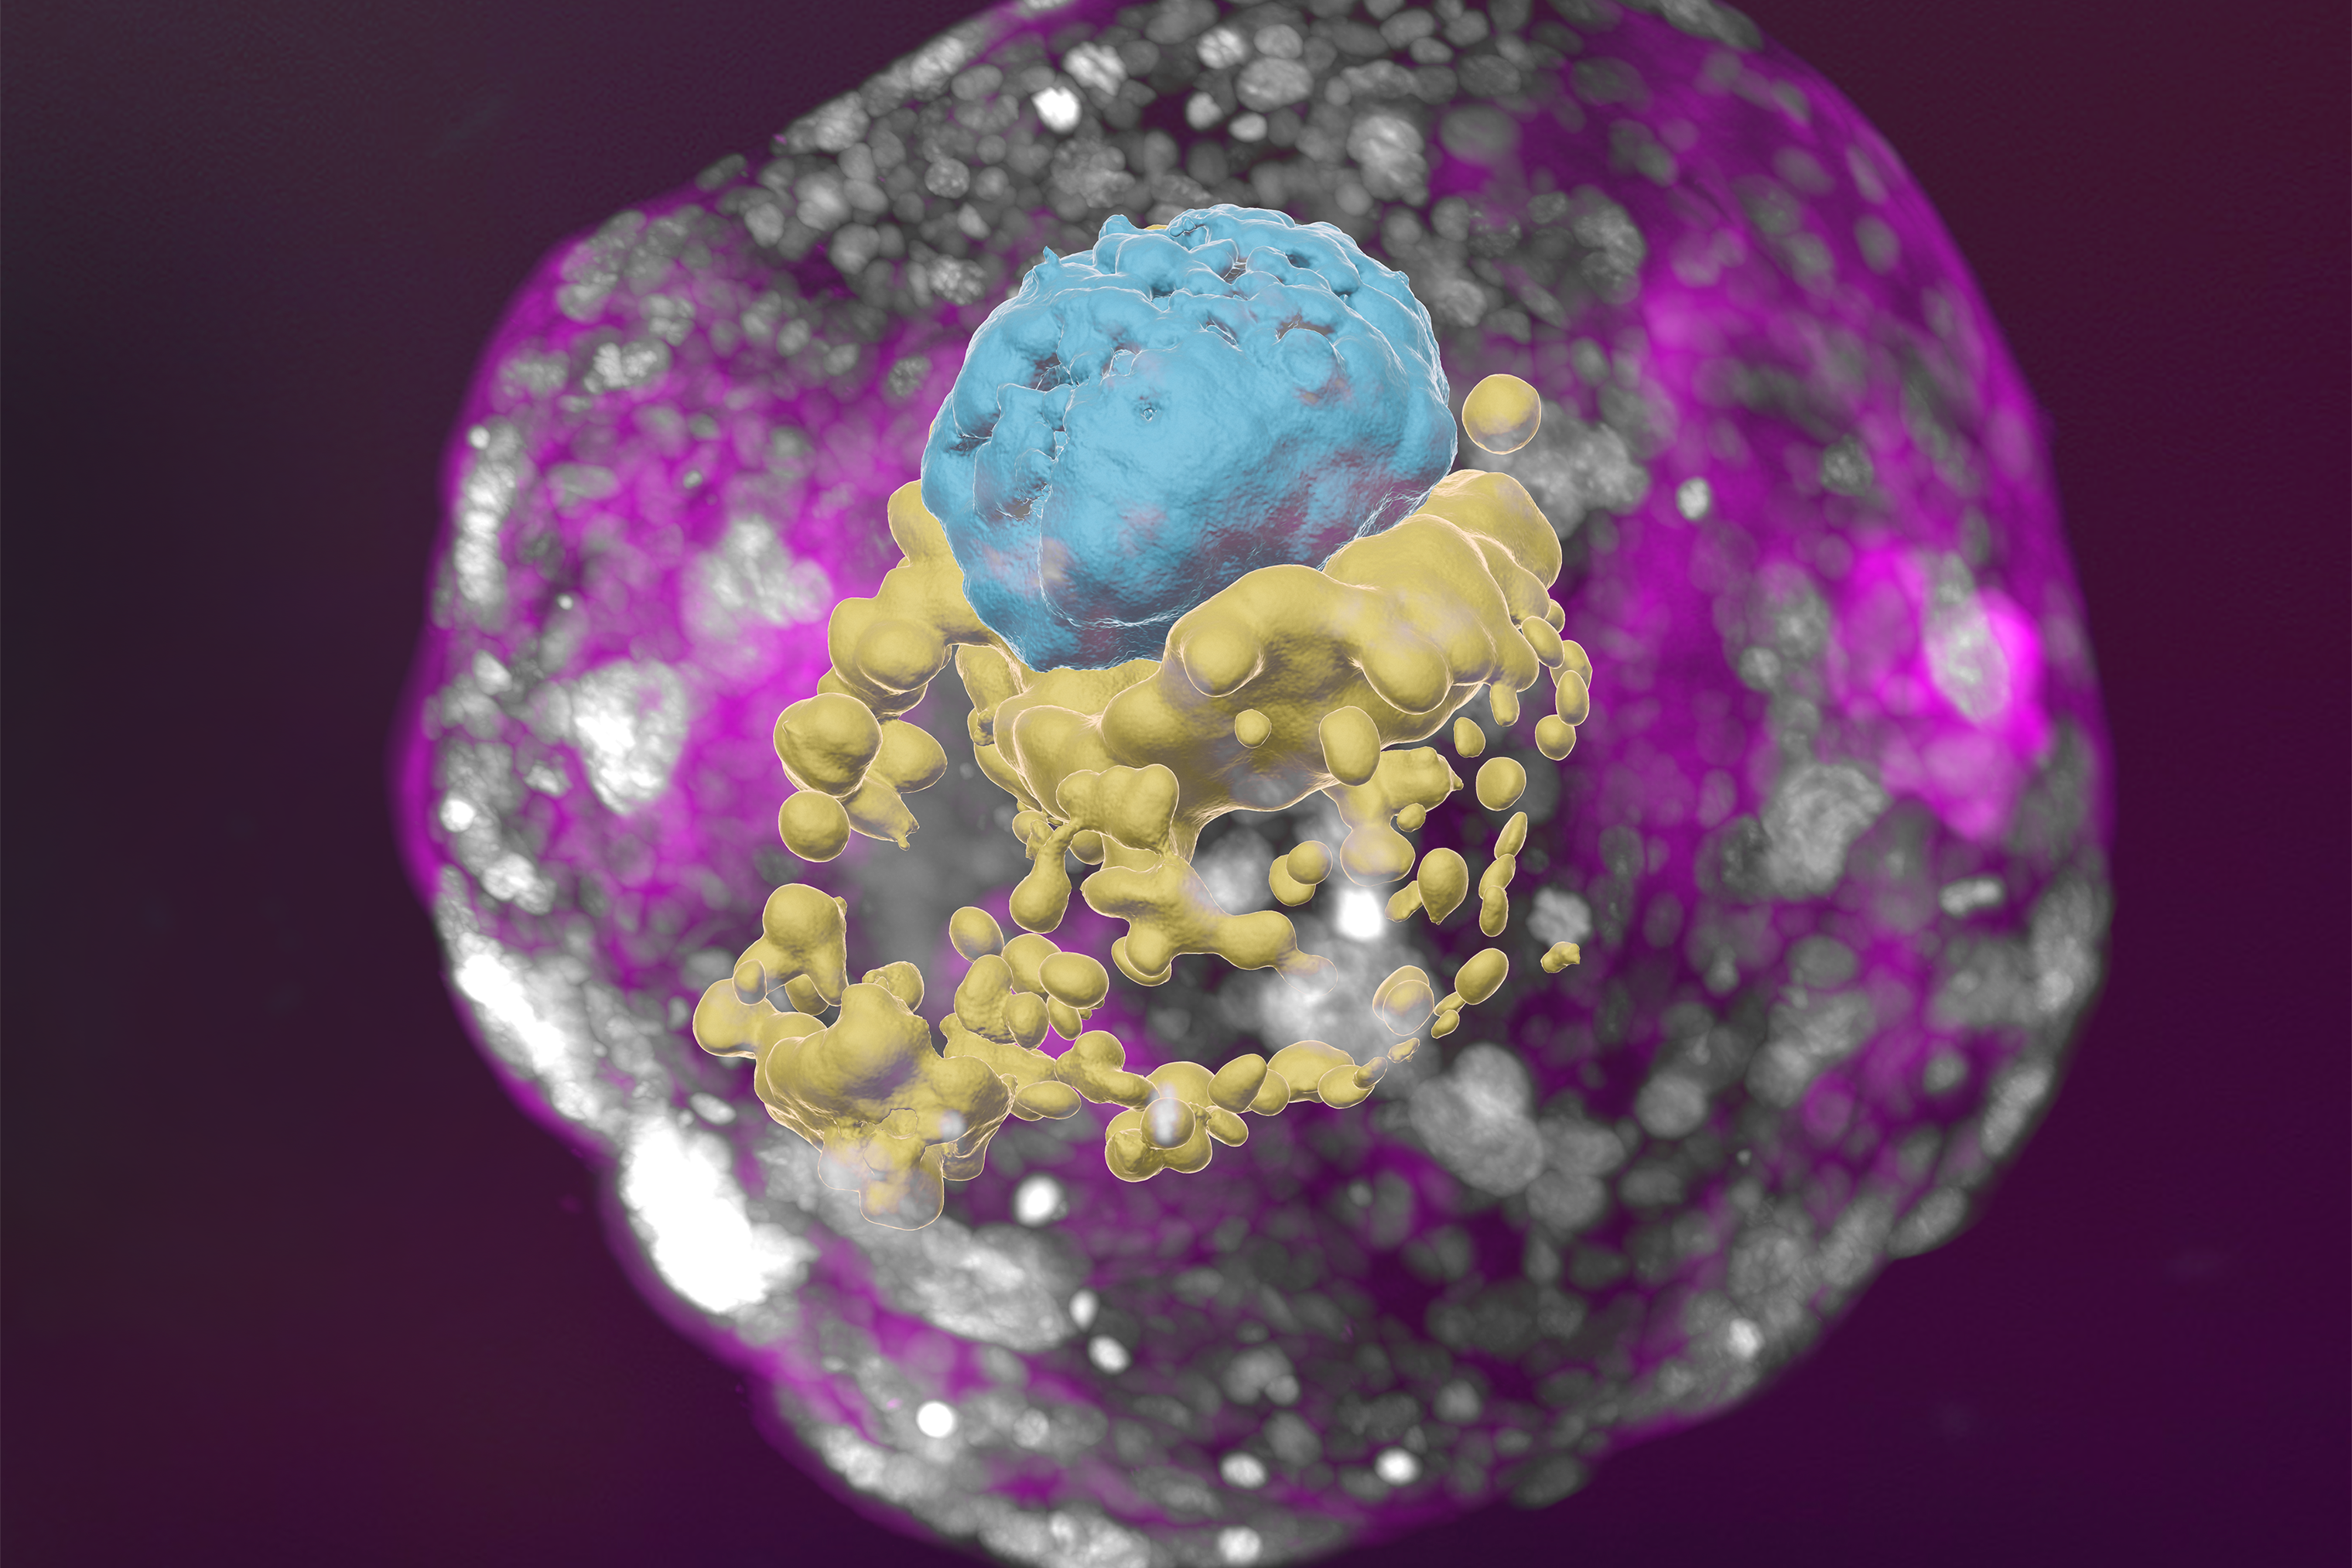 A stem-cell derived human embryo model (Weizmann Institute of Science/PA)